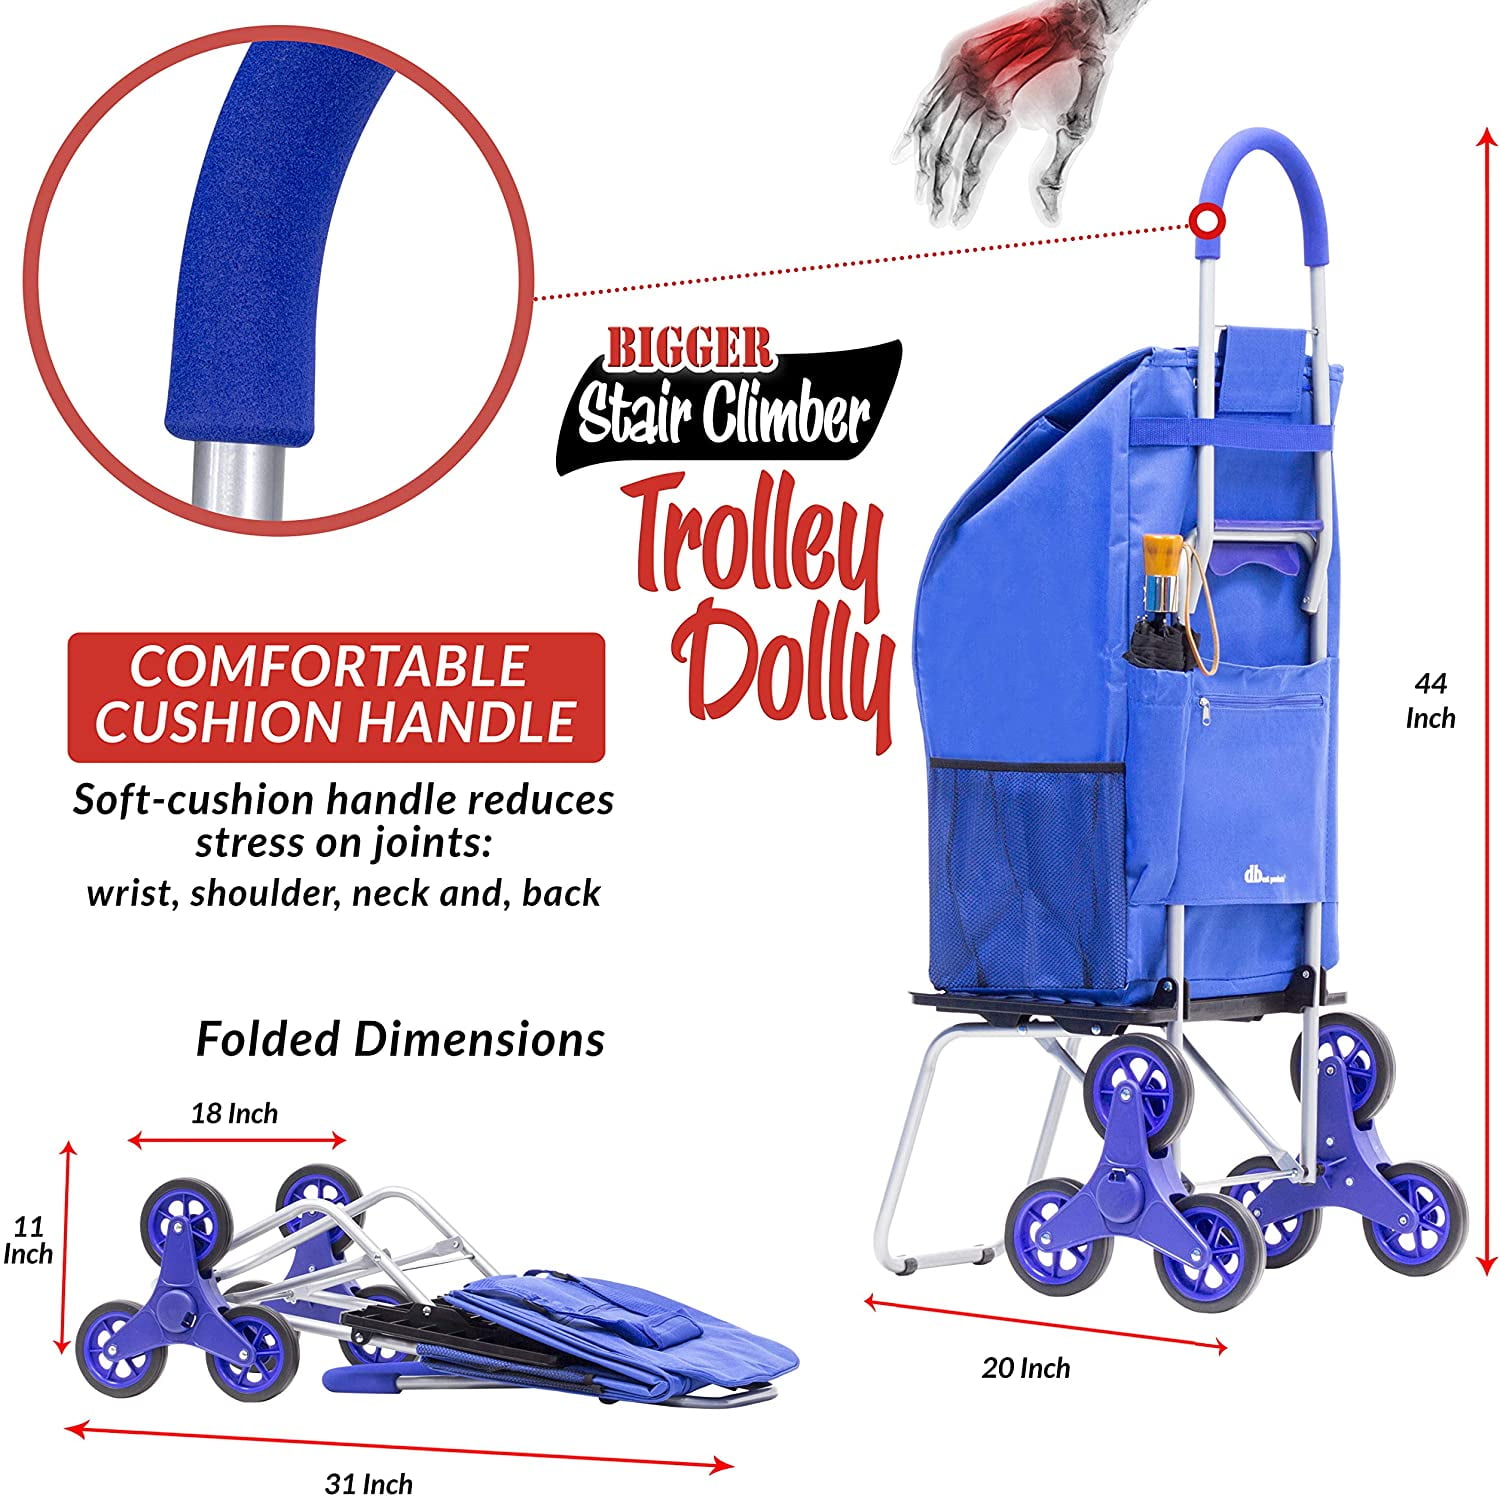 dbest Products 01-554 Bigger Trolley Dolly Stair Climber Grocery Foldable Cart Condo Apartment Blue 